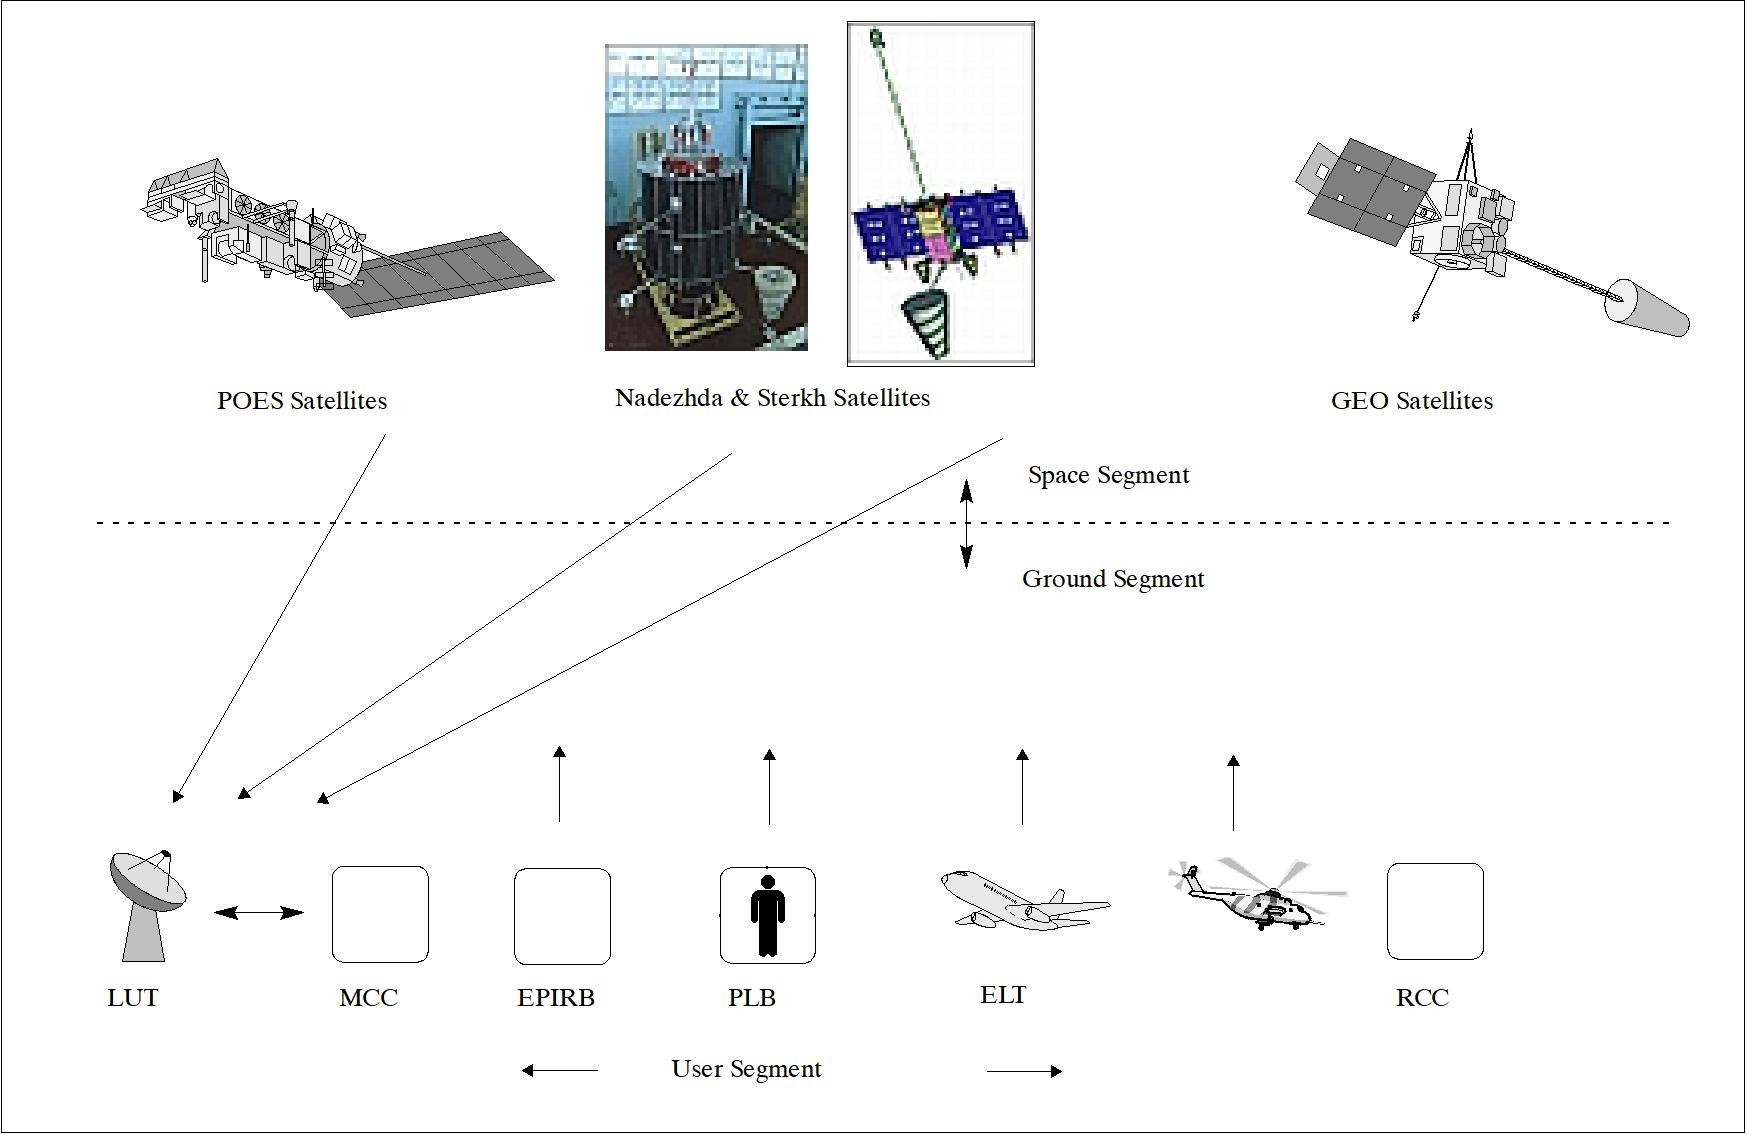 Figure 3: System elements of Search and Rescue Satellites